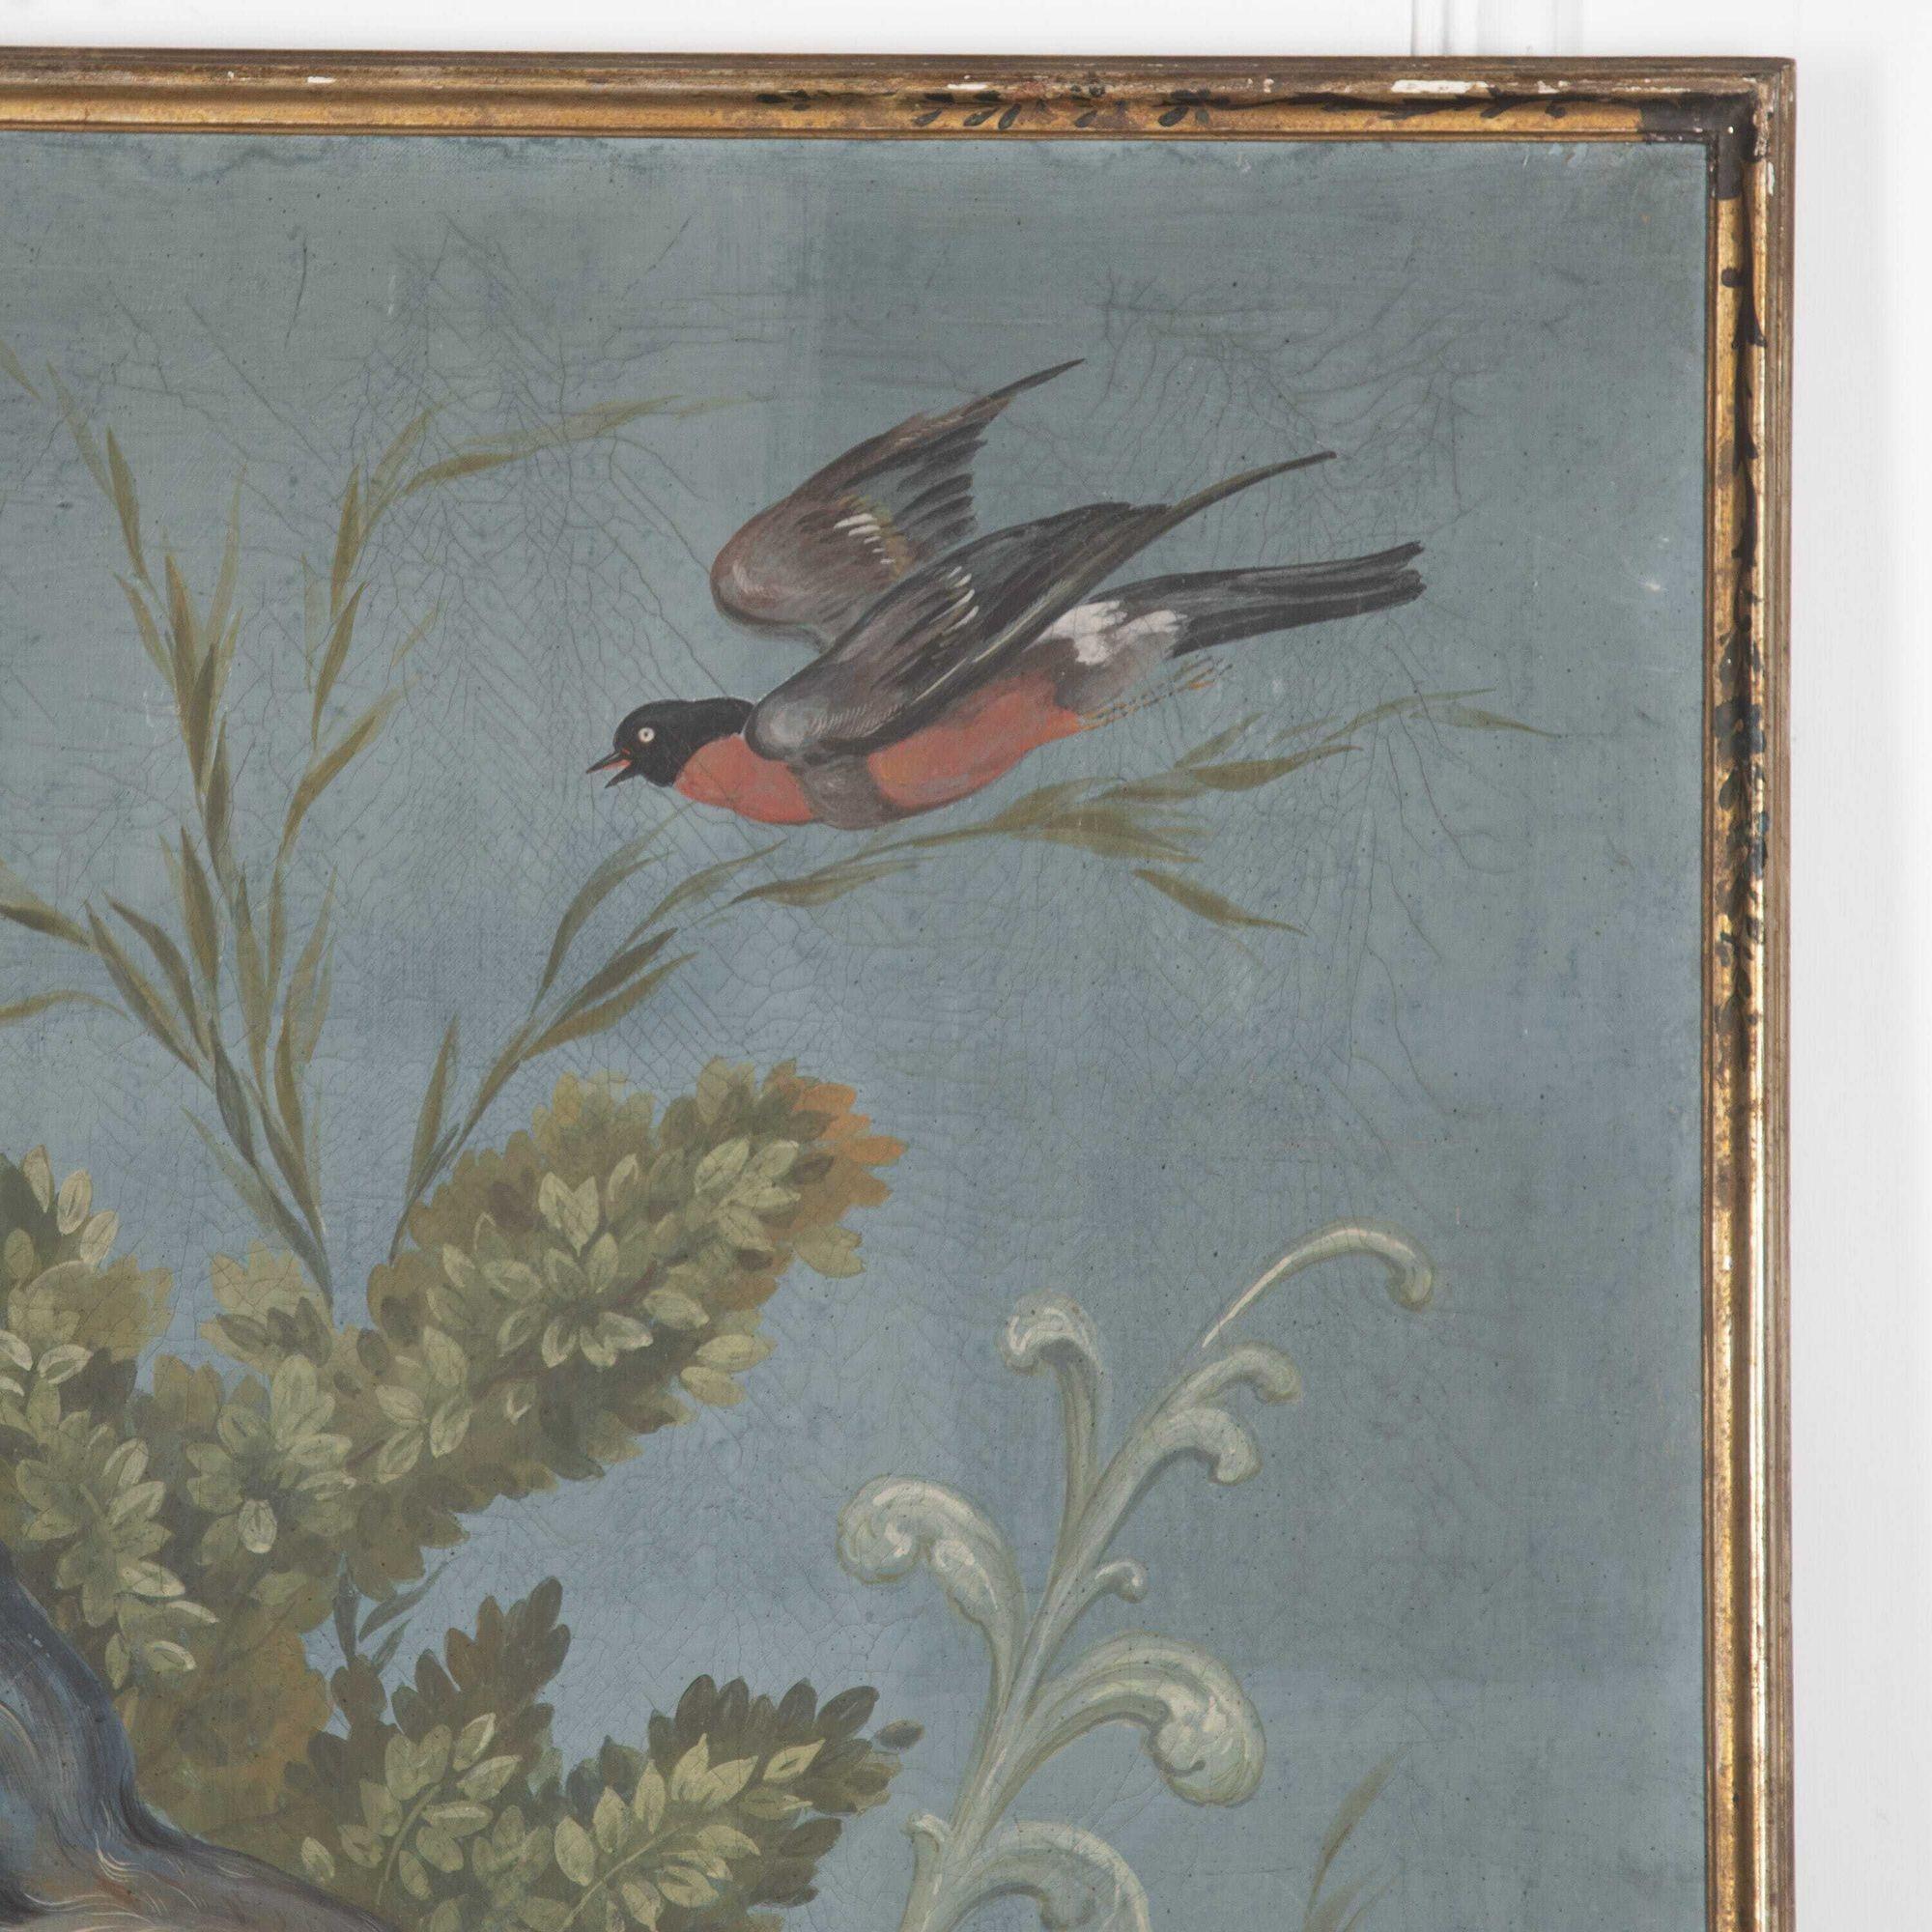 A stunning large-scale painting by Vittorio Raineri (1797 - 1869).
This a tempera on canvas painting presented in a decorated frame, depicting a fantasy landscapes of European game birds around a central stream with soft foliage.
The scientific